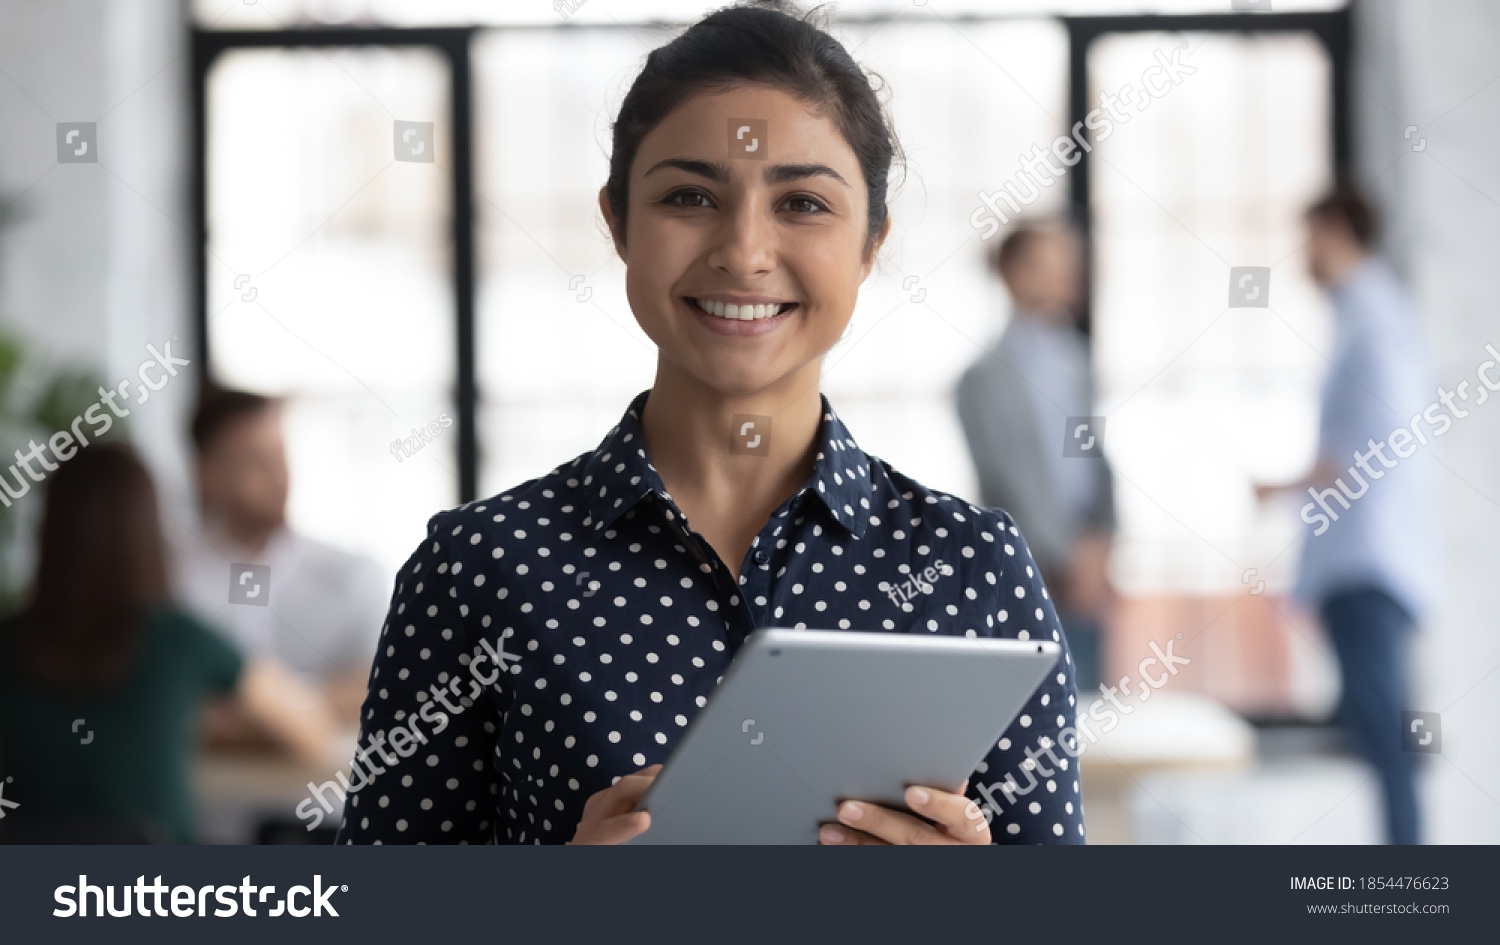 Glad to help you! Portrait of smiling confident indian female insurance broker bank manager hr assistant standing in open space office holding digital tablet looking at camera ready to assist client #1854476623